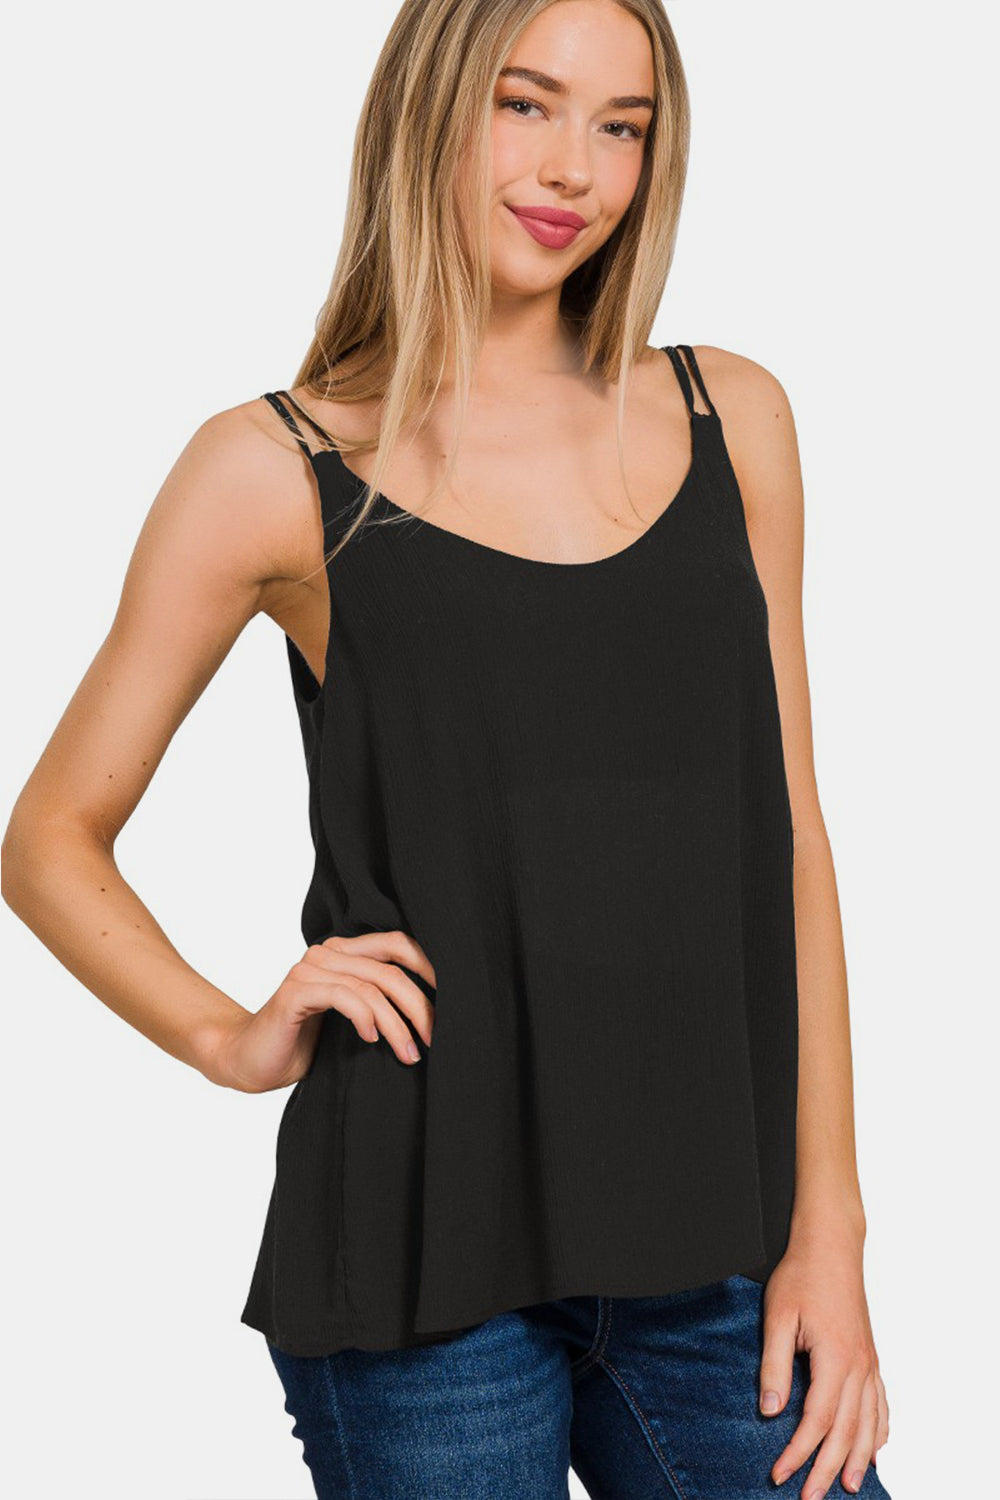 The Woven Double Spaghetti Strap V-Neck Cami is a stylish and versatile top that is perfect for layering or wearing on its own. The double spaghetti straps add a touch of sophistication and detail to the V-neckline. Made from woven fabric, this cami drapes beautifully and feels luxurious against the skin.  S - L